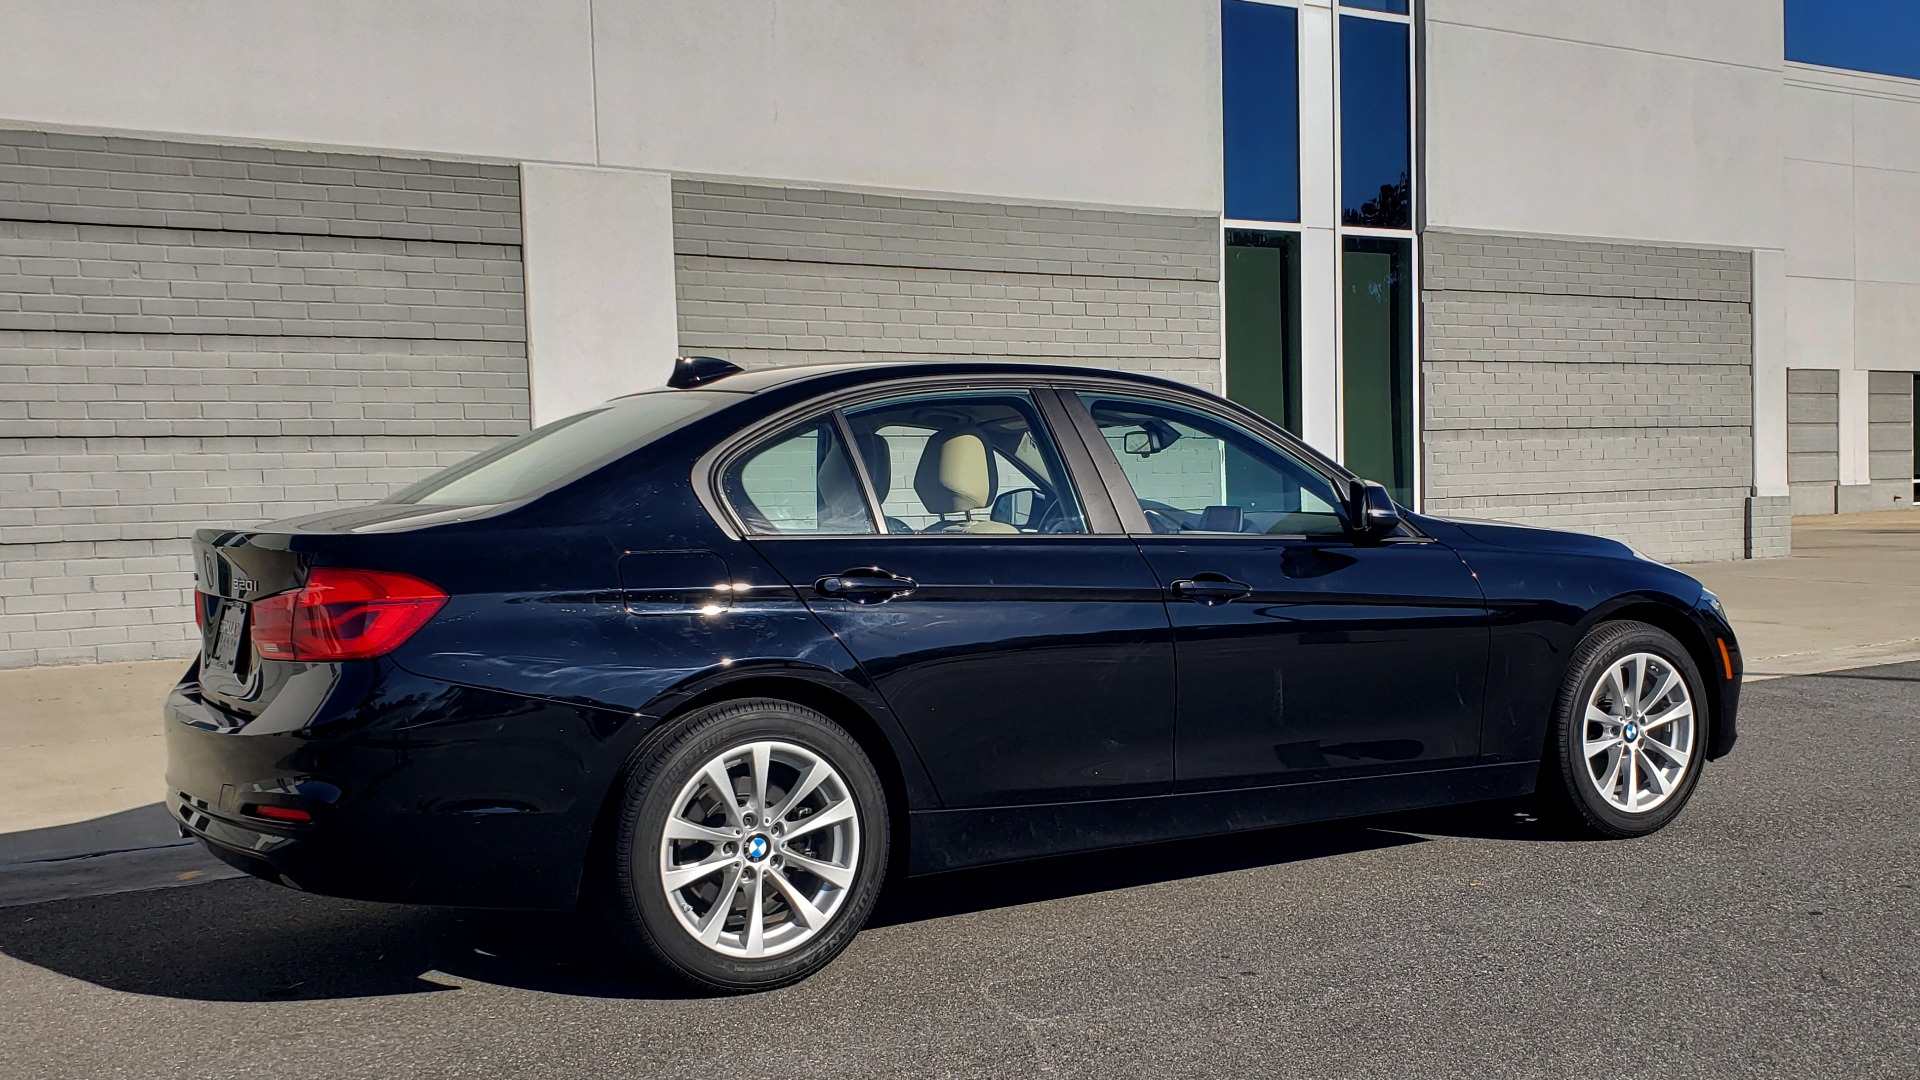 Used 2018 BMW 3 SERIES 320IXDRIVE 2.0L SEDAN / HEATED SEATS / REARVIEW for sale Sold at Formula Imports in Charlotte NC 28227 7